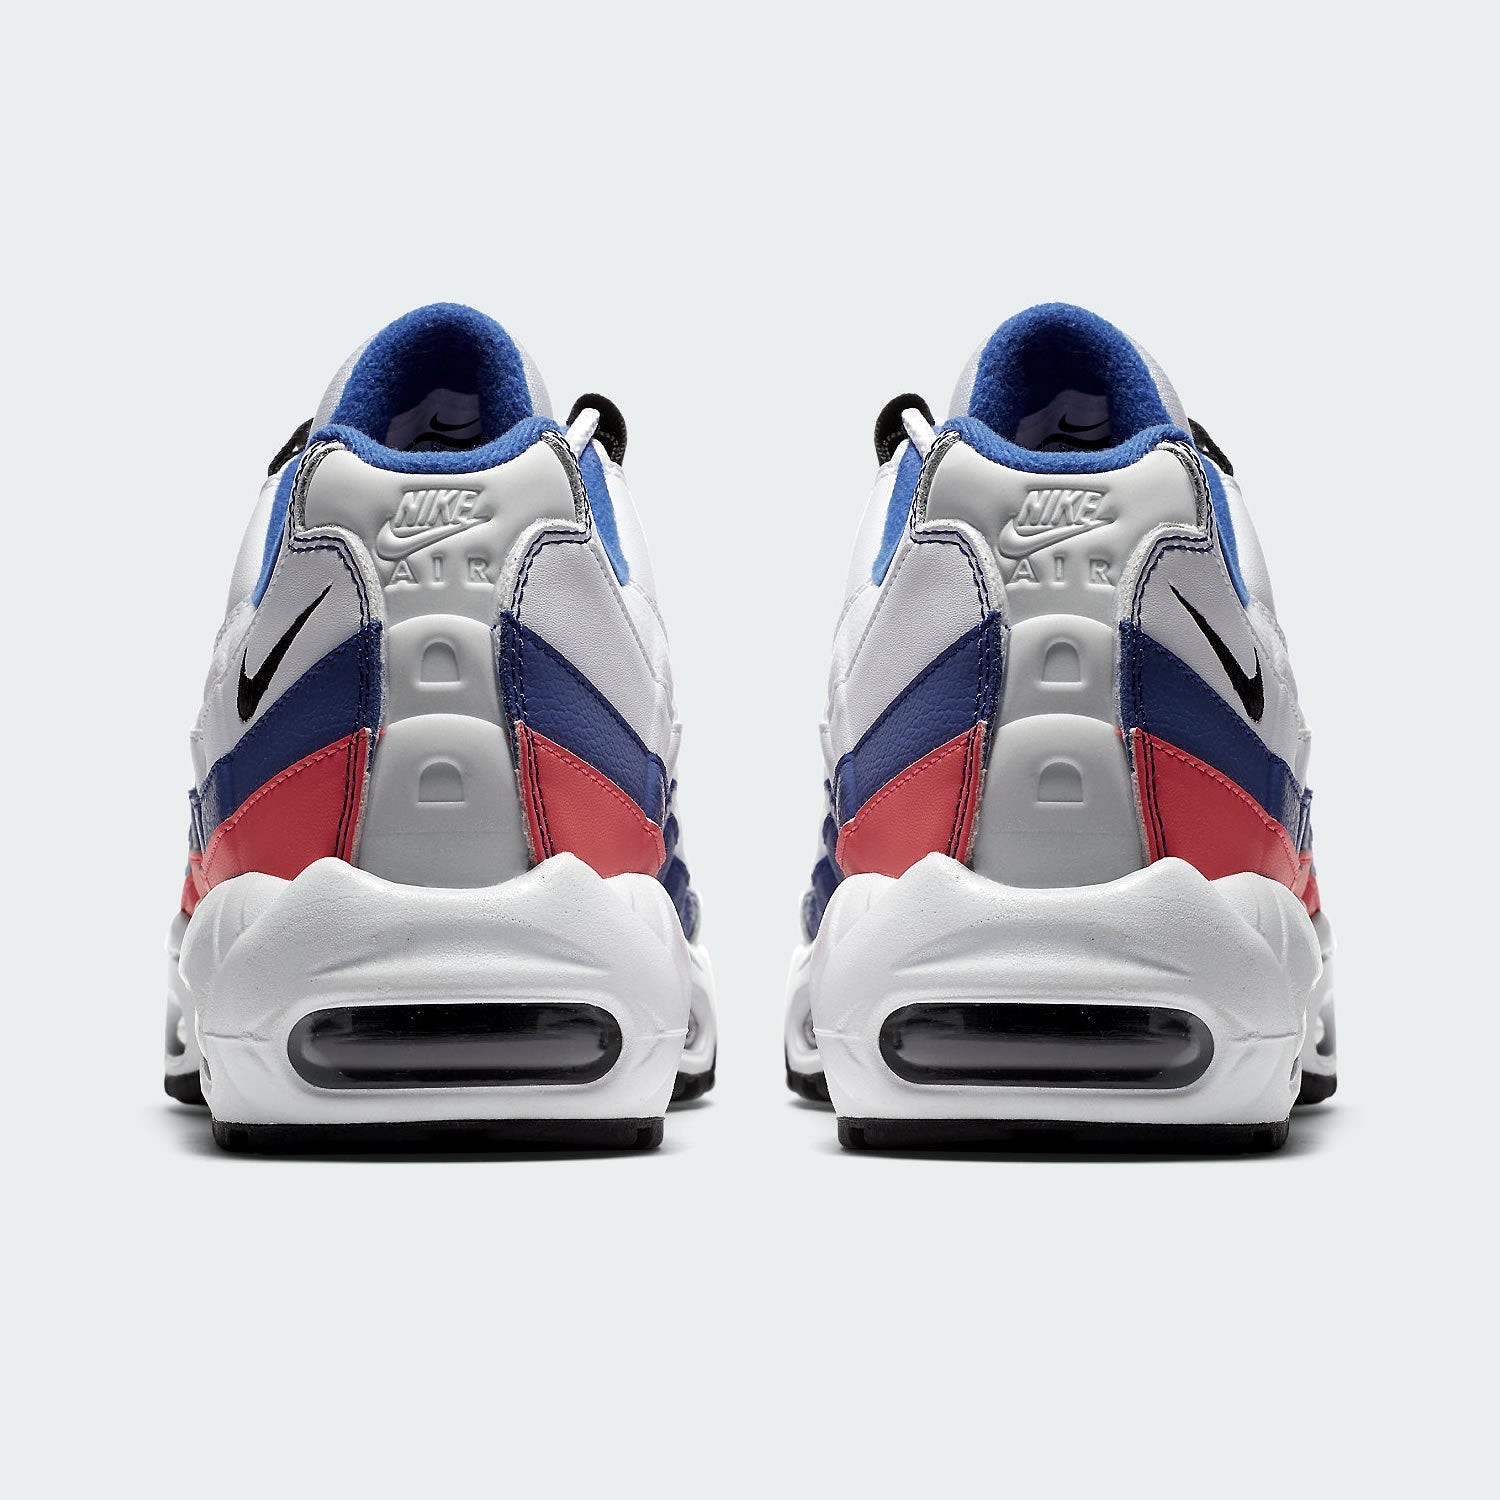 tradesports.co.uk Nike Men's Air Max 95 Essential Shoes 749766 106 UK 7.5